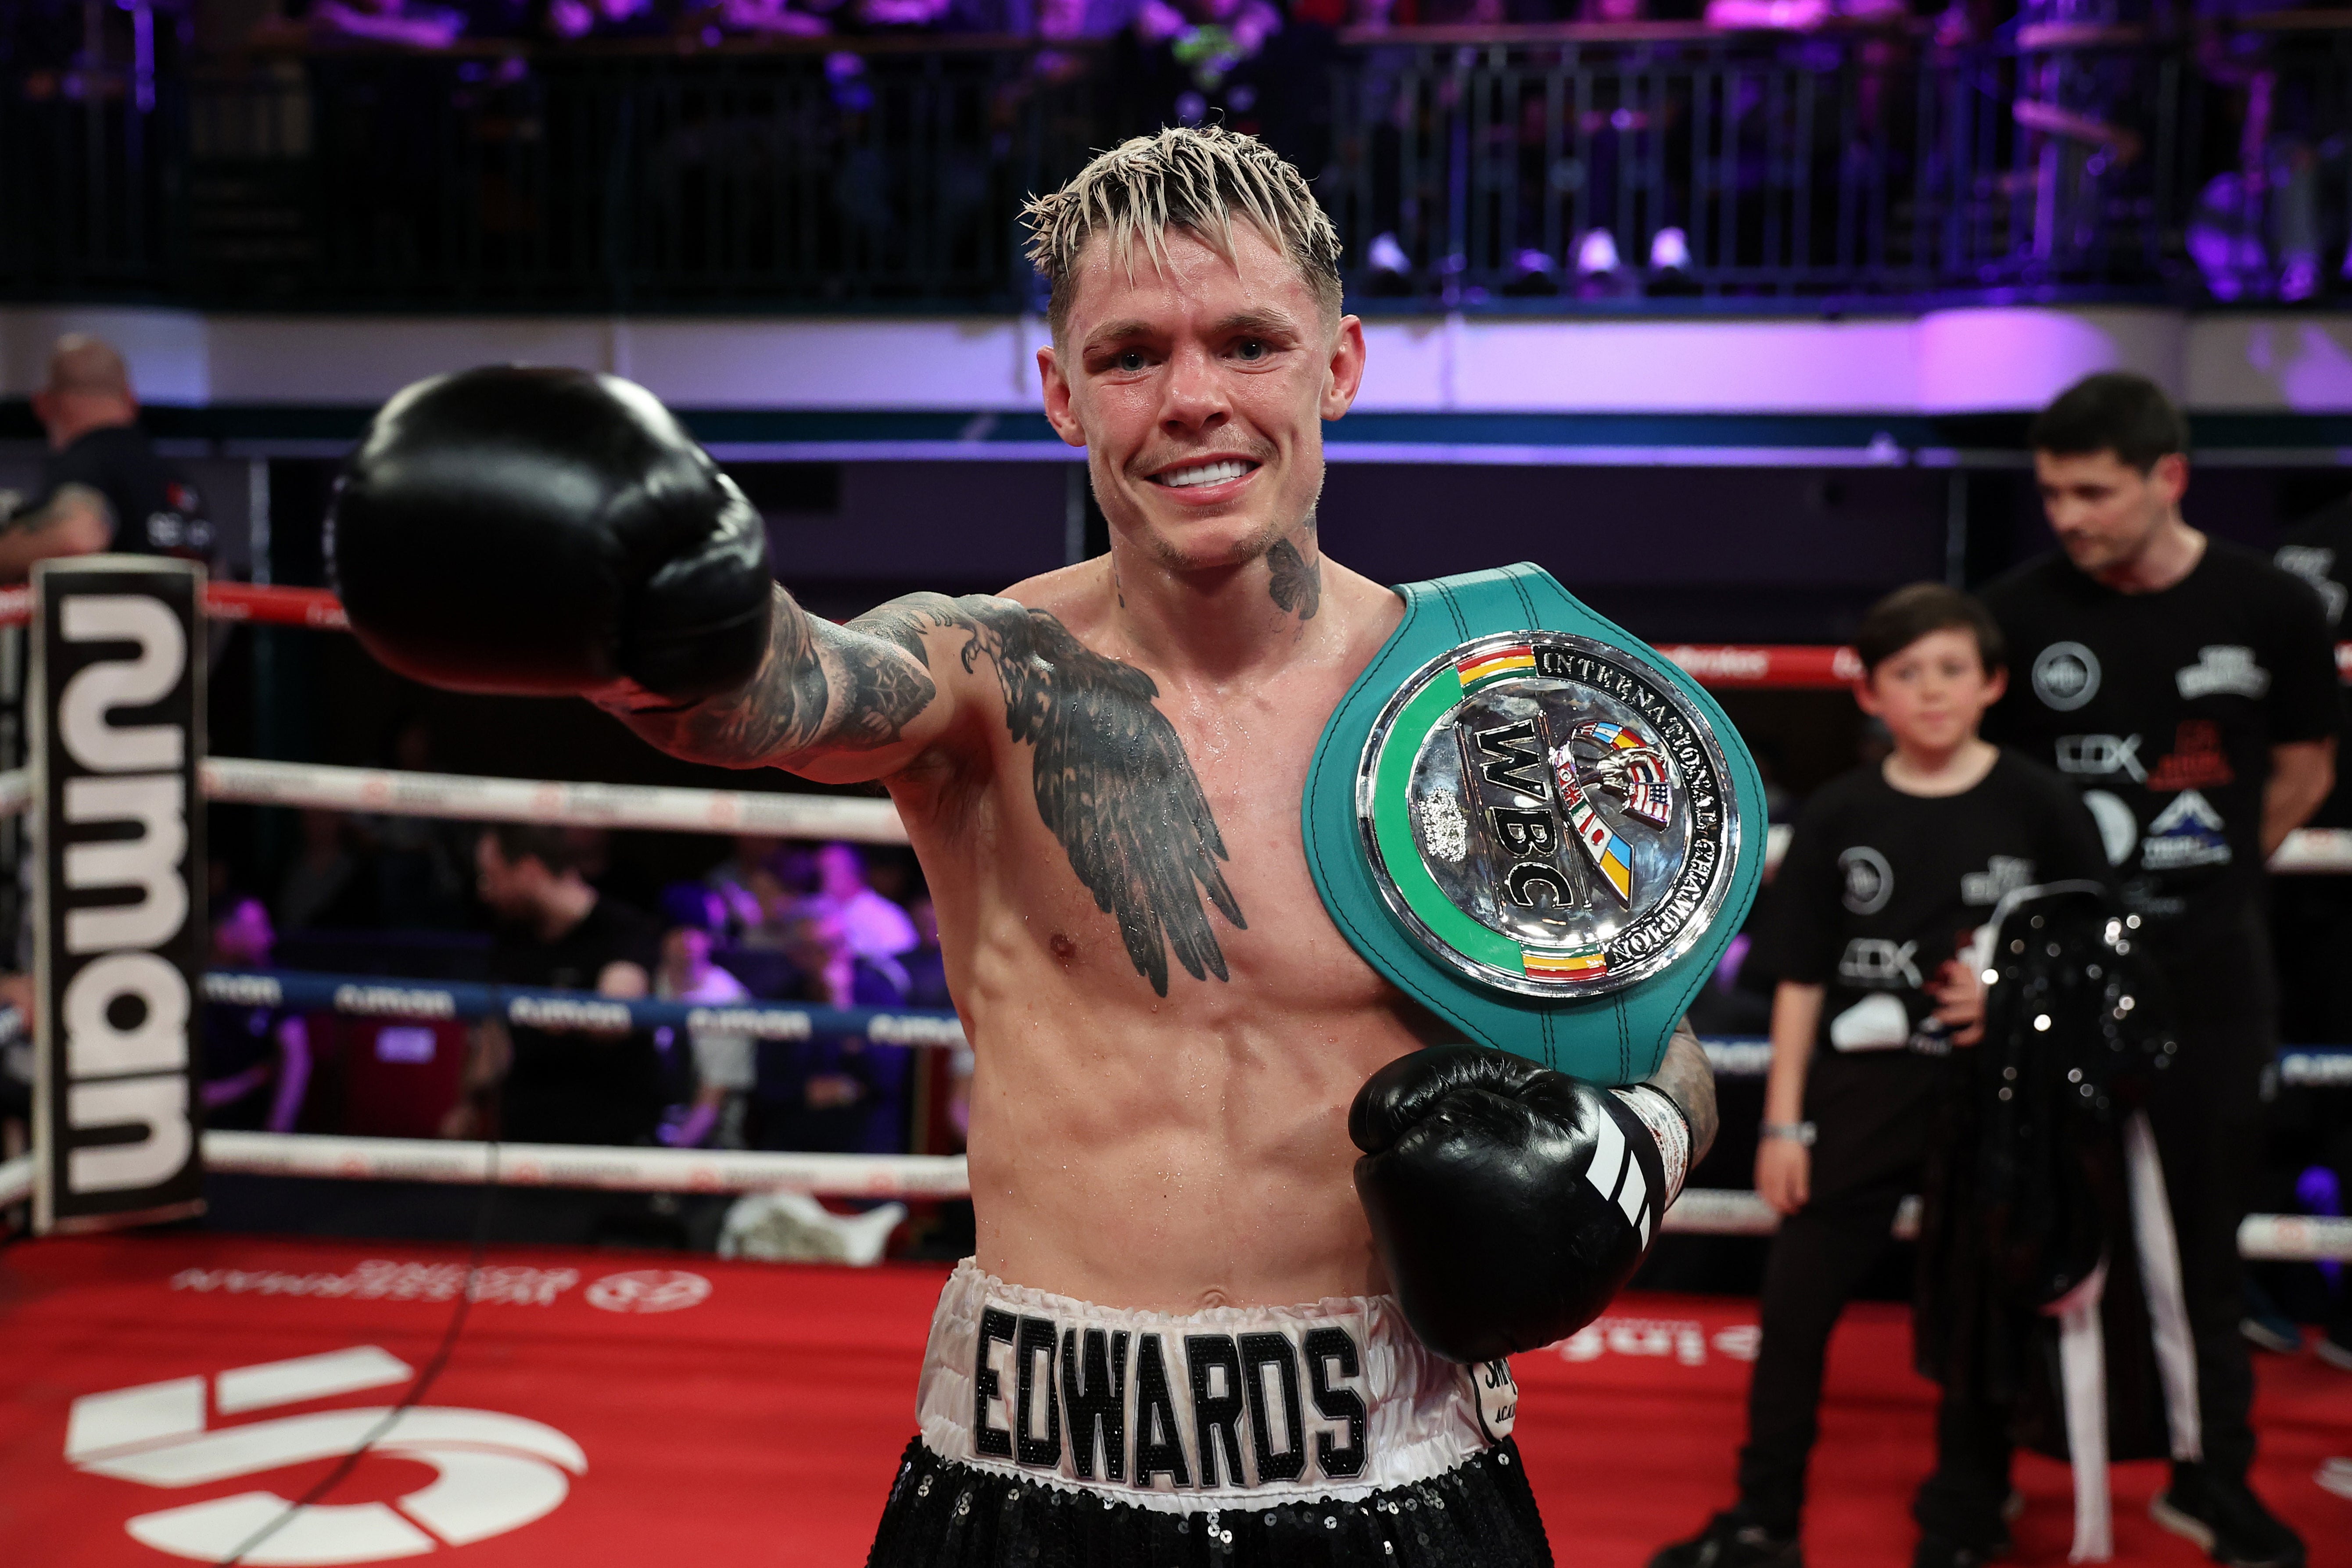 Charlie Edwards impressively beat Georges Ory to thrust himself back into world title contention